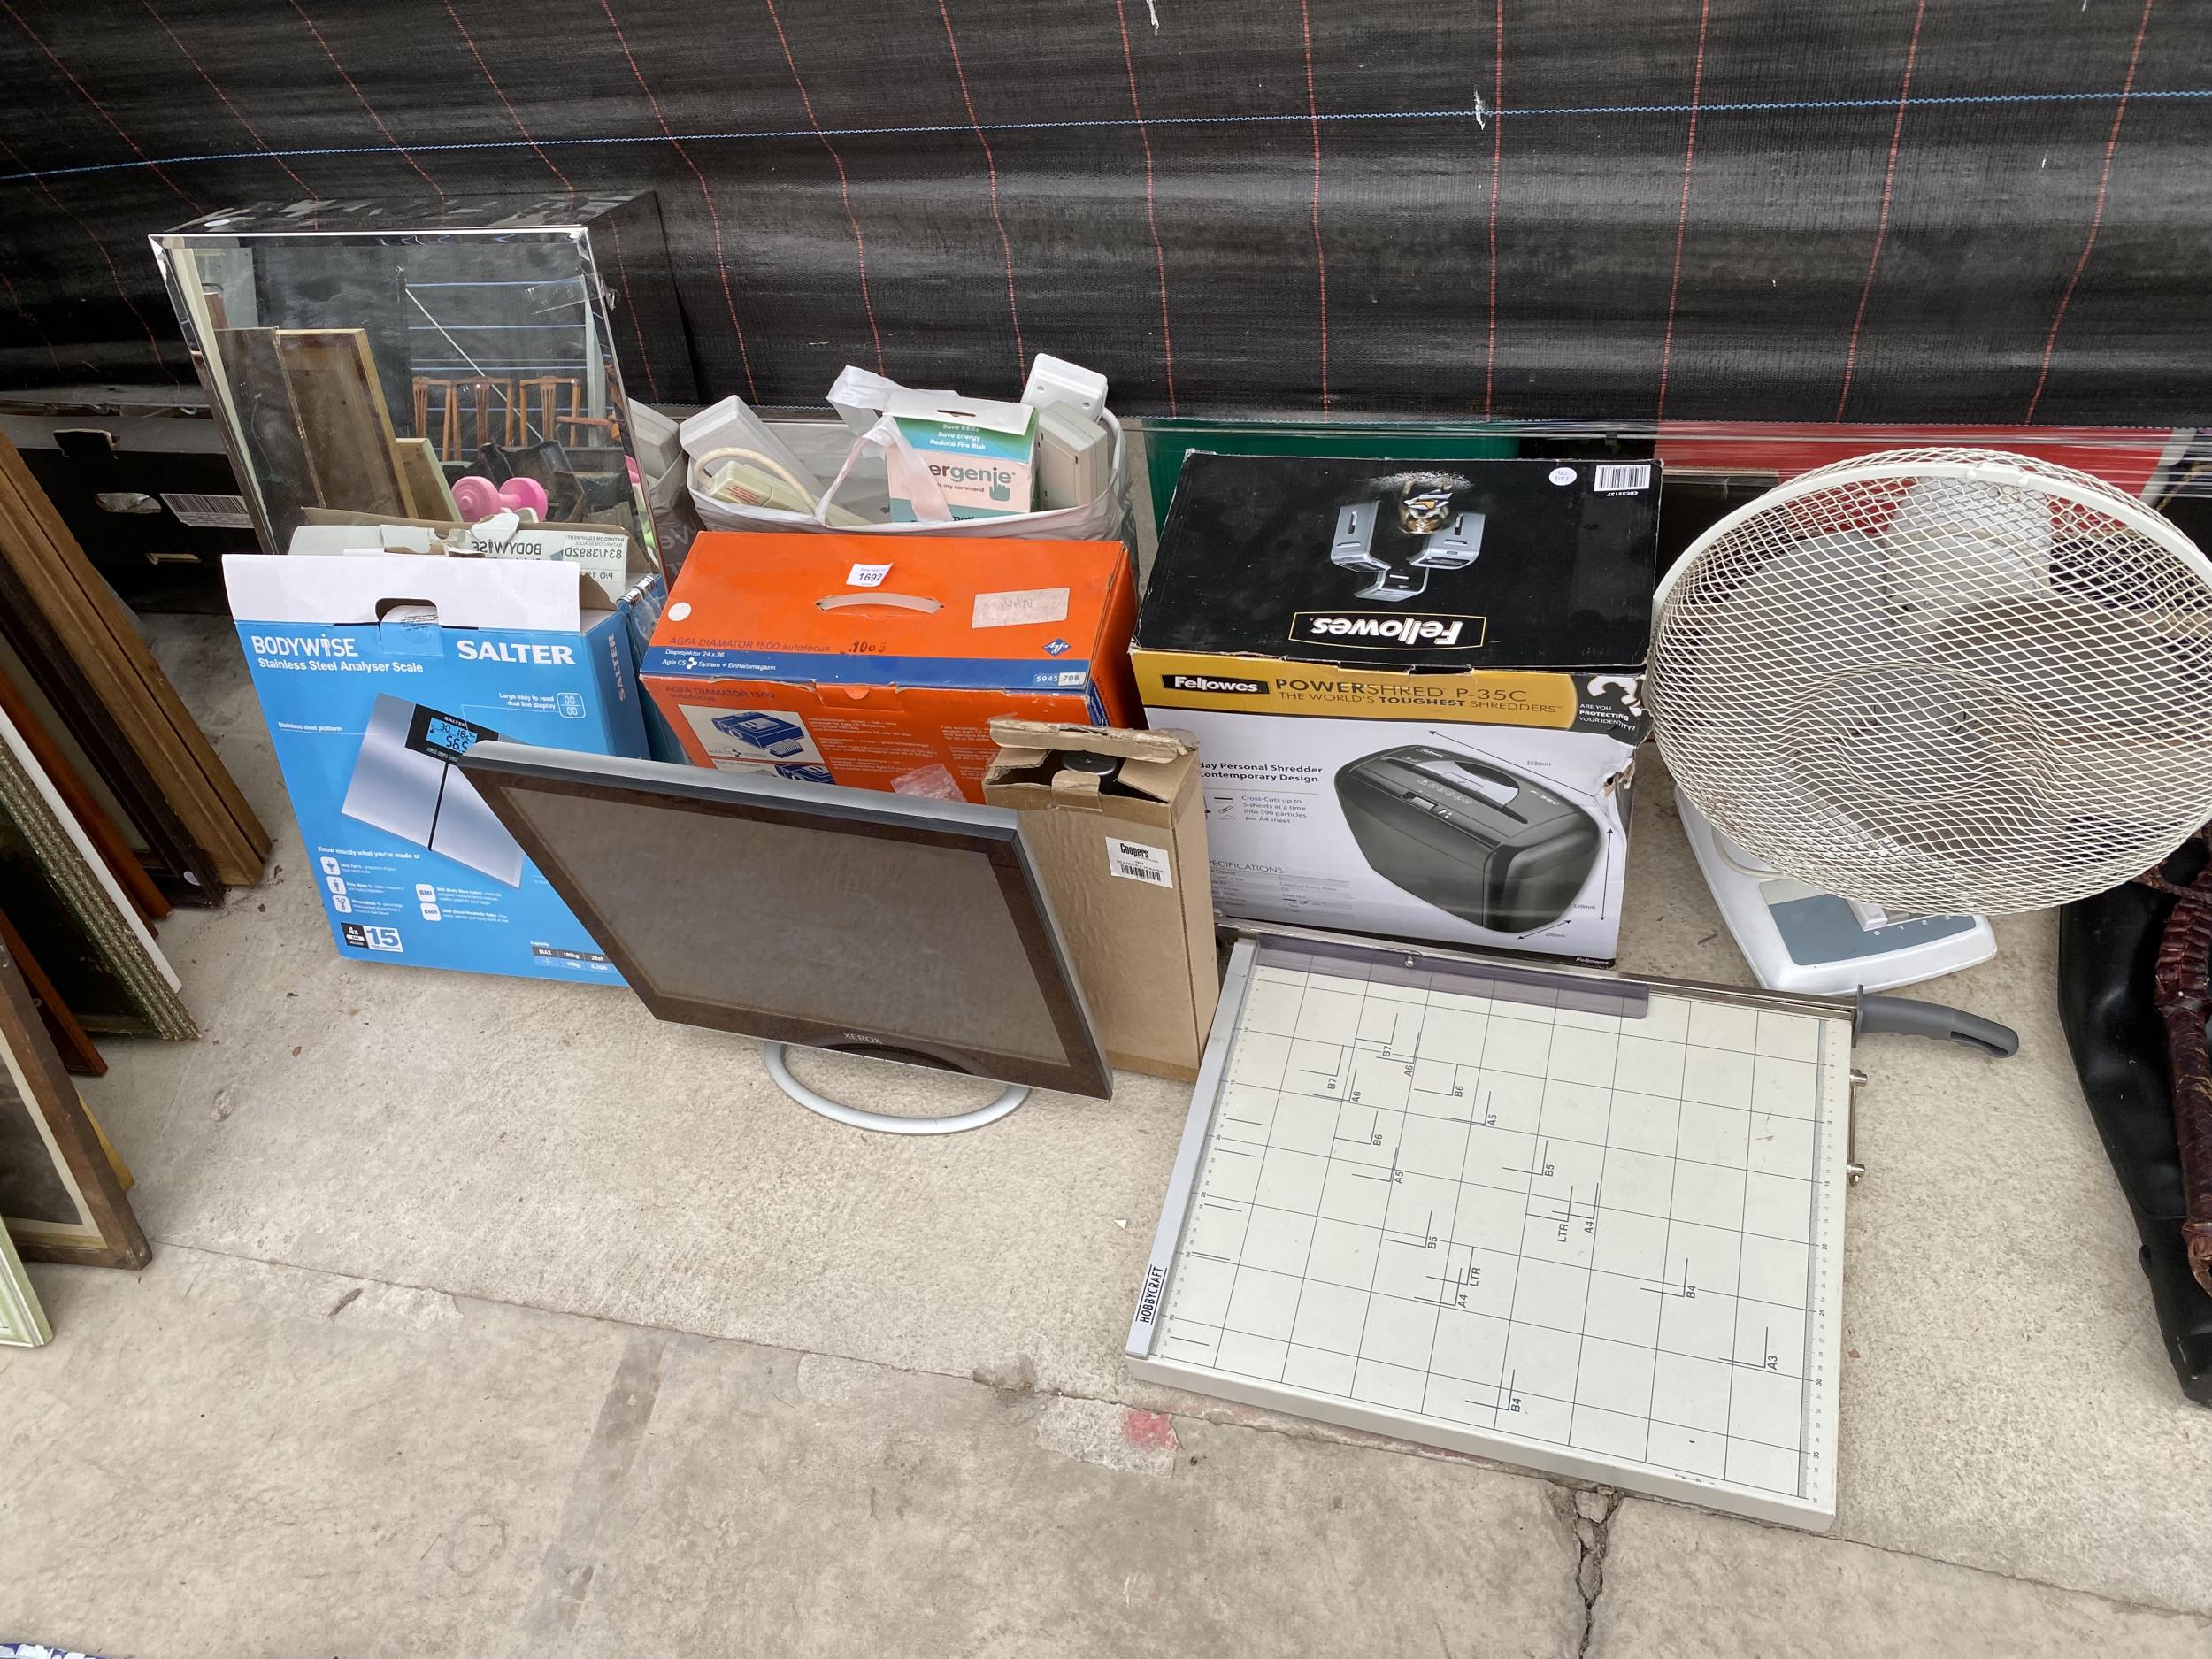 VARIOUS ITEMS TO INCLUDE A MIRRORED BATHROOM CABINET, SHREDDER, GUILLOTINE, BOXED BATHROOM SCALES,